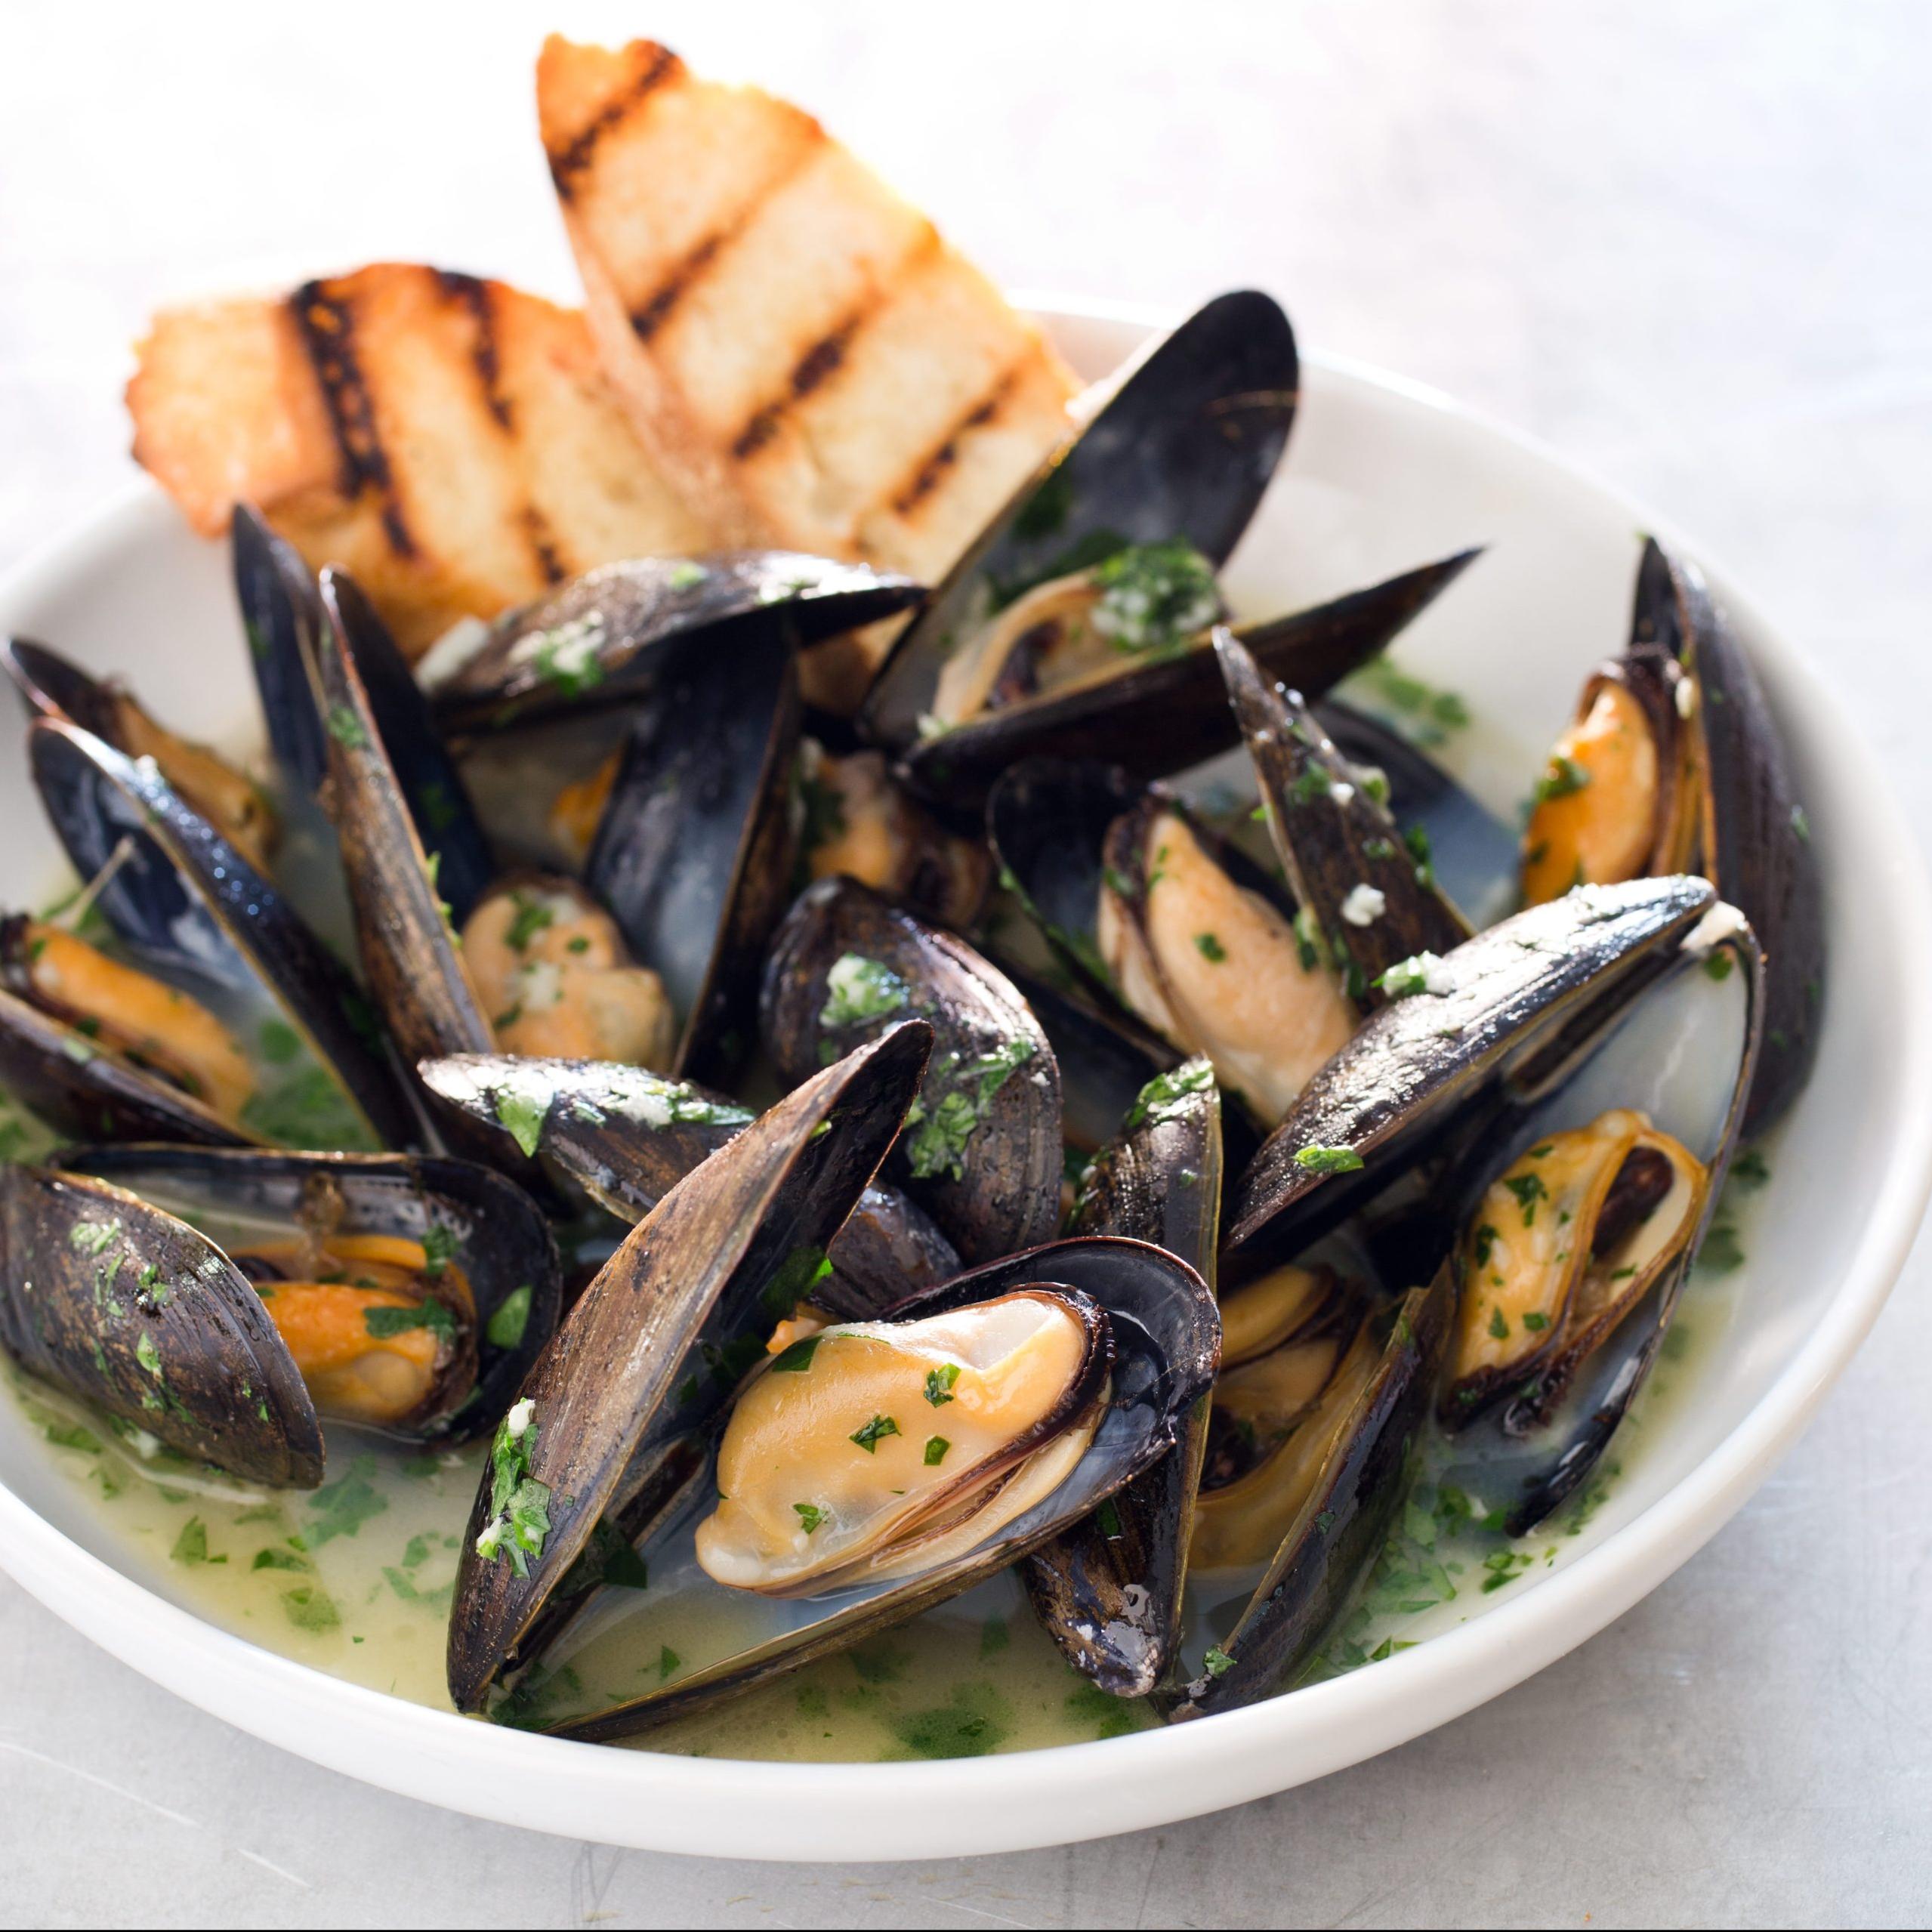  Capture the essence of summer by serving a plate of these flavorful and aromatic mussels.